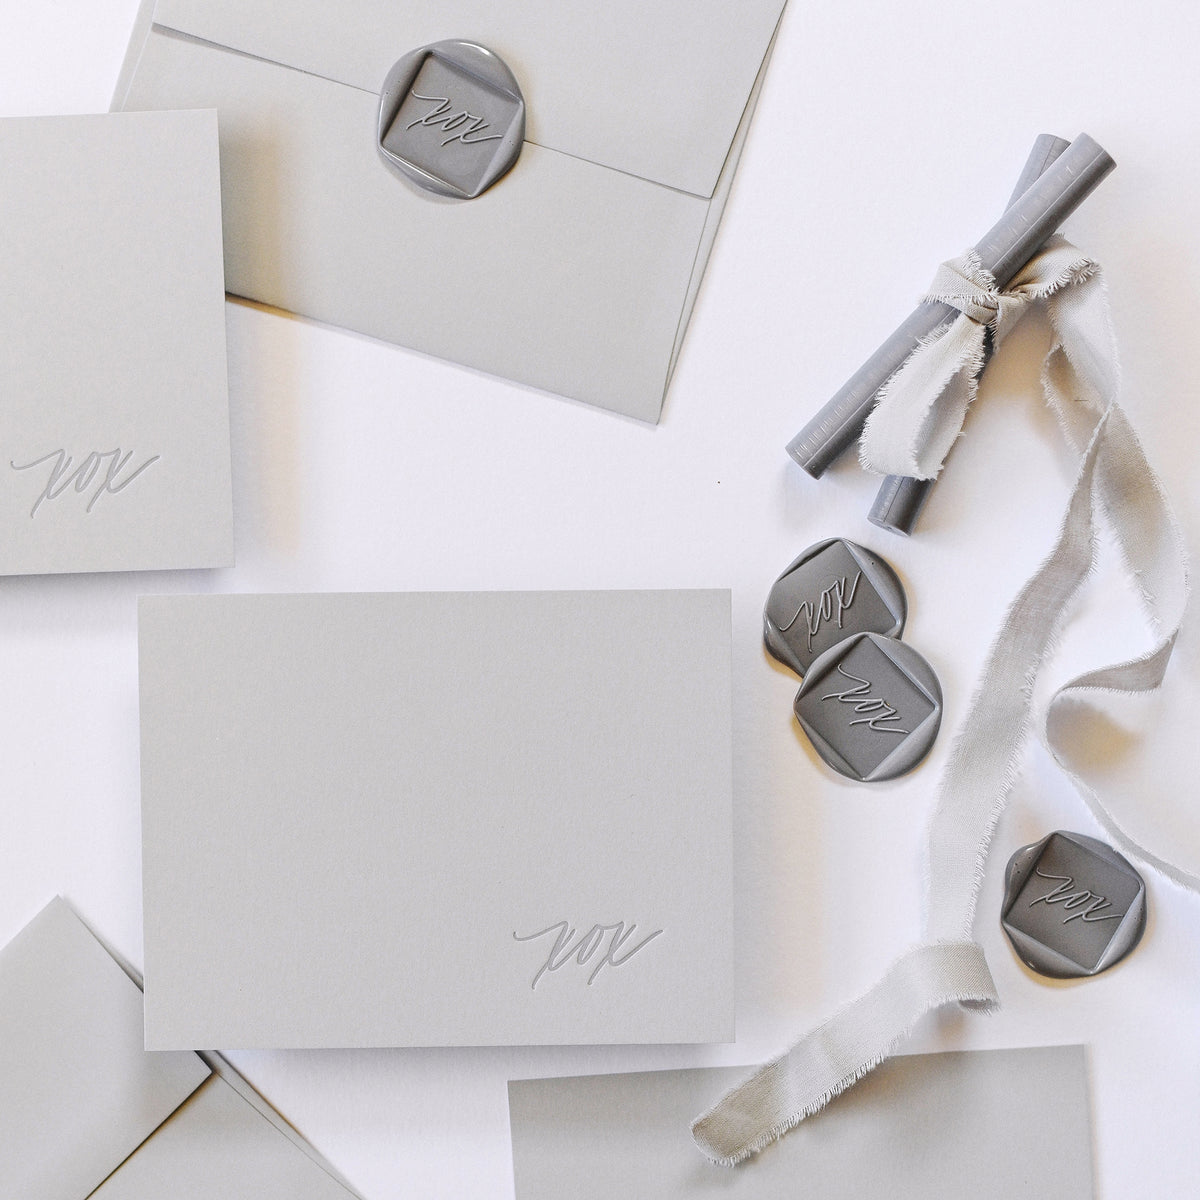 &quot;XOX&quot; Flat Boxed Note Set, letterpress printed by hand.